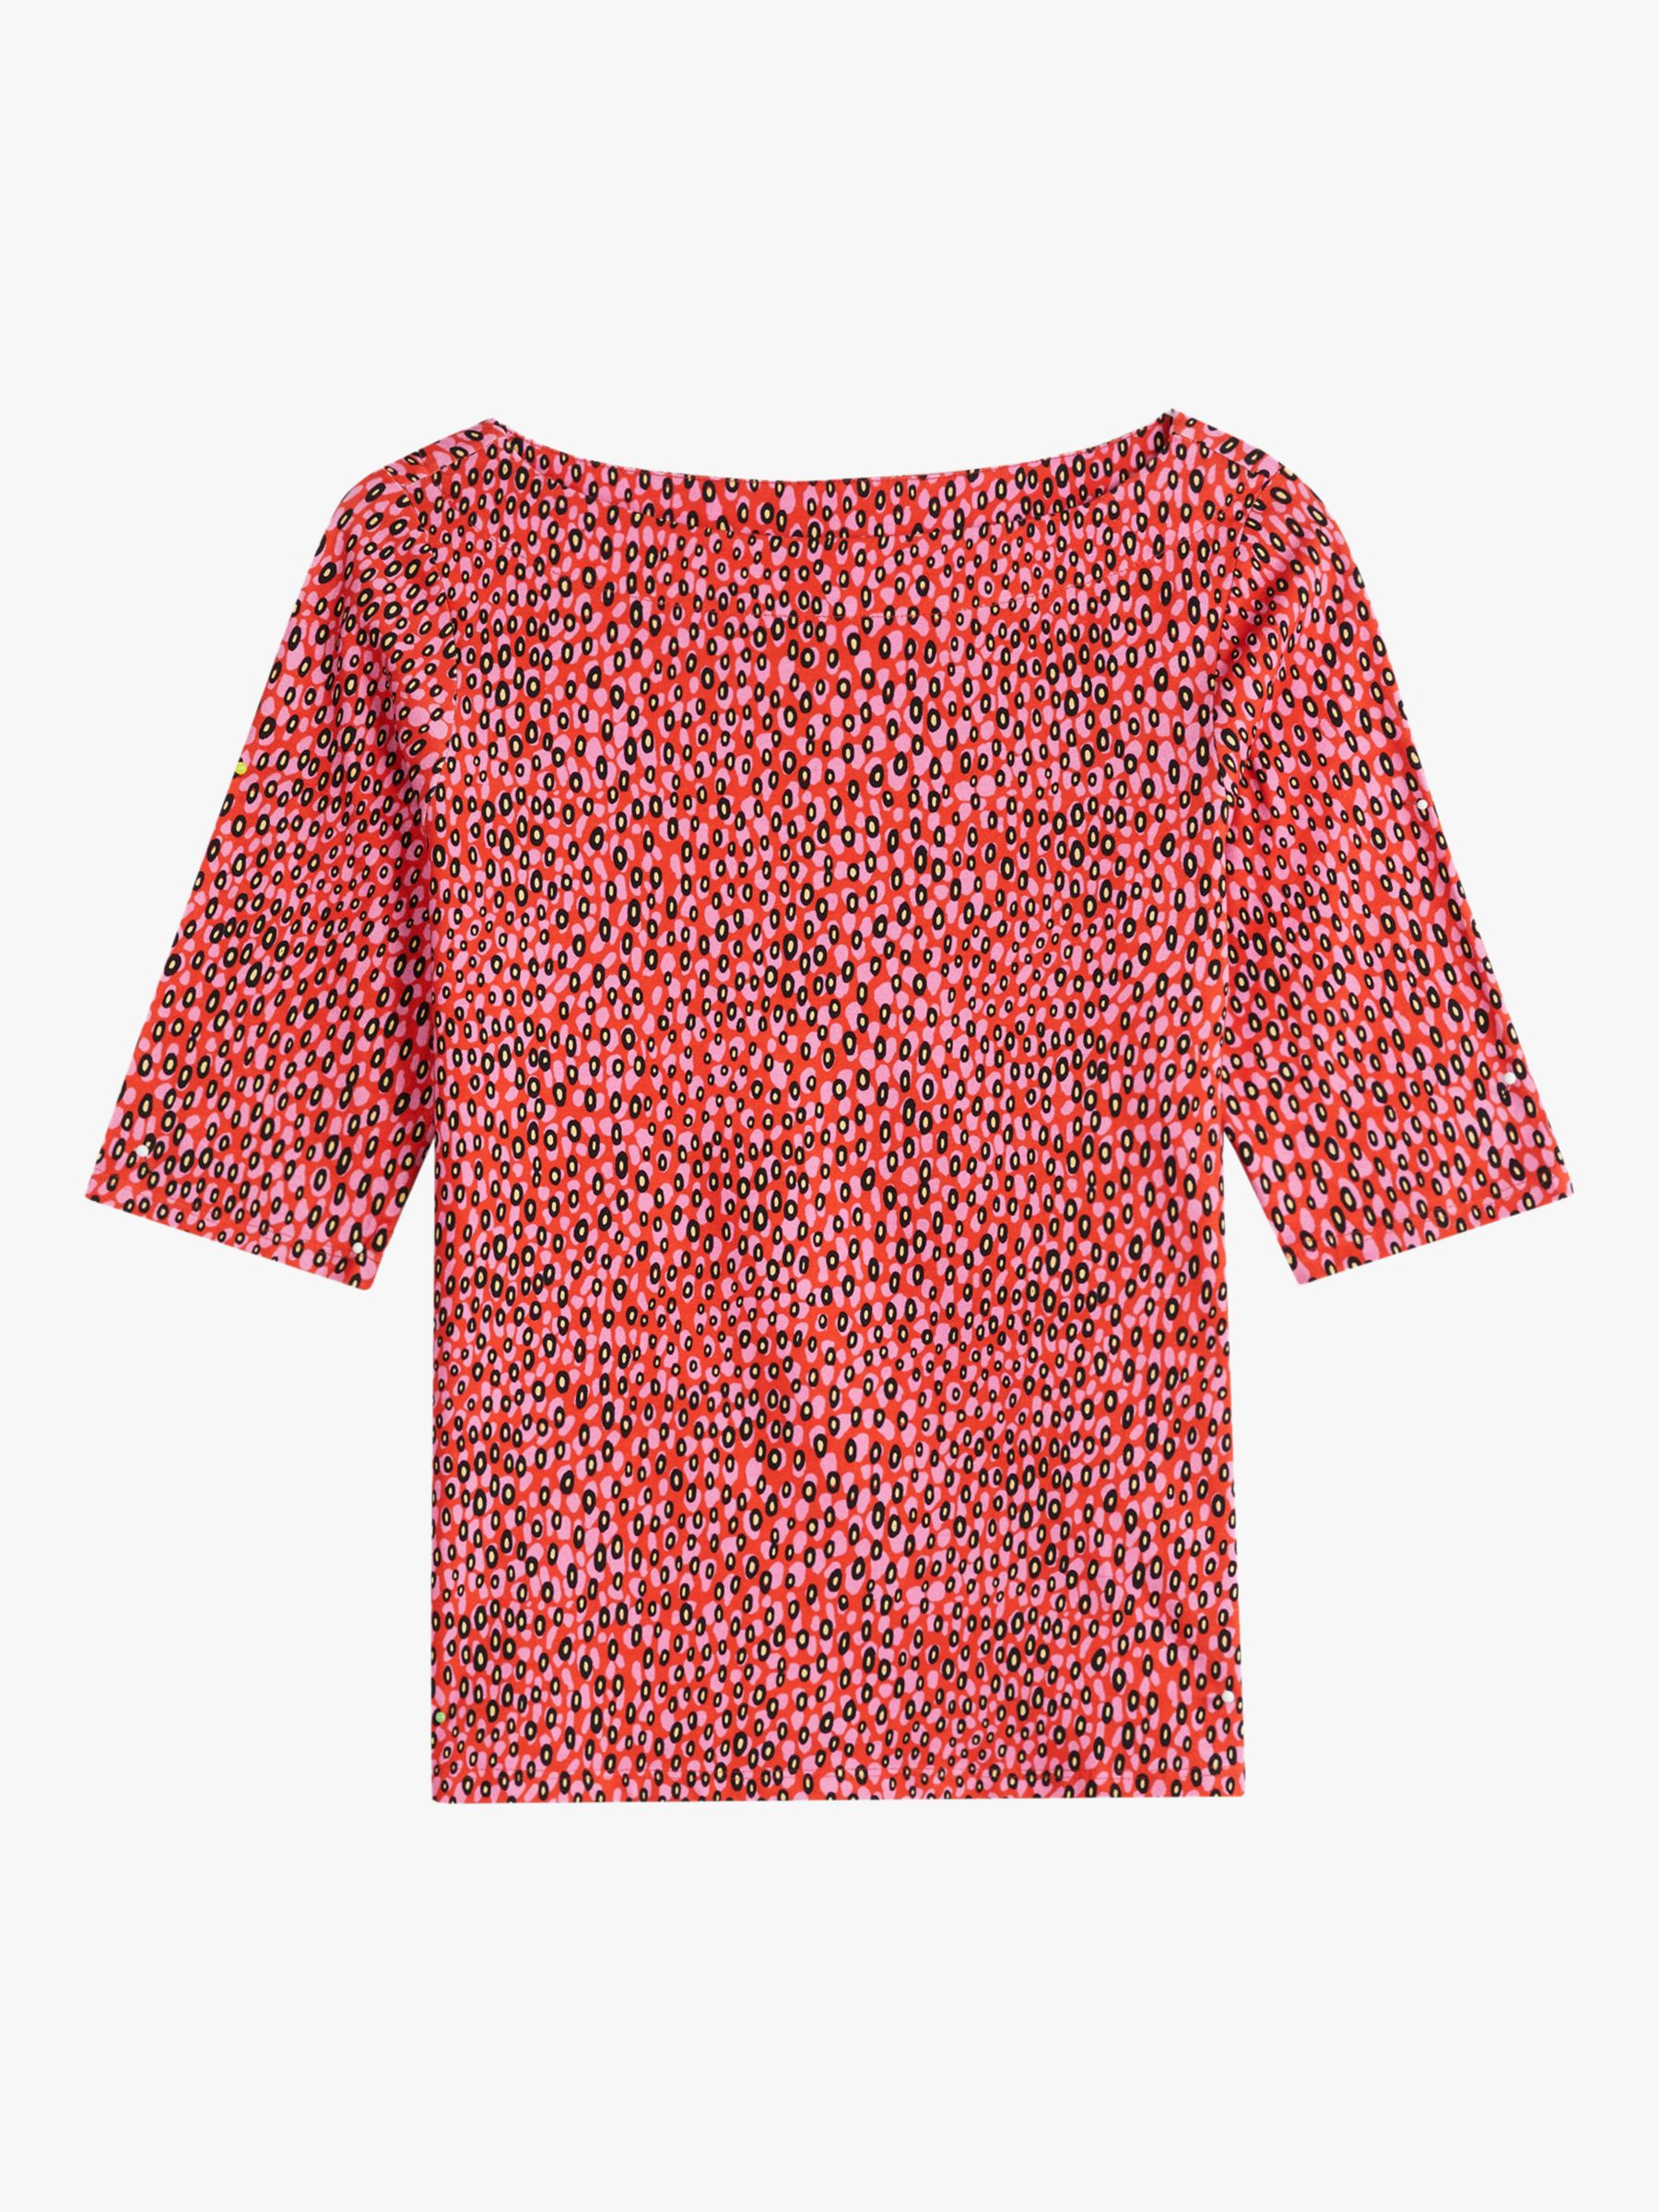 Ted Baker Willew Spot Pattern T-Shirt, Hot Pink at John Lewis & Partners